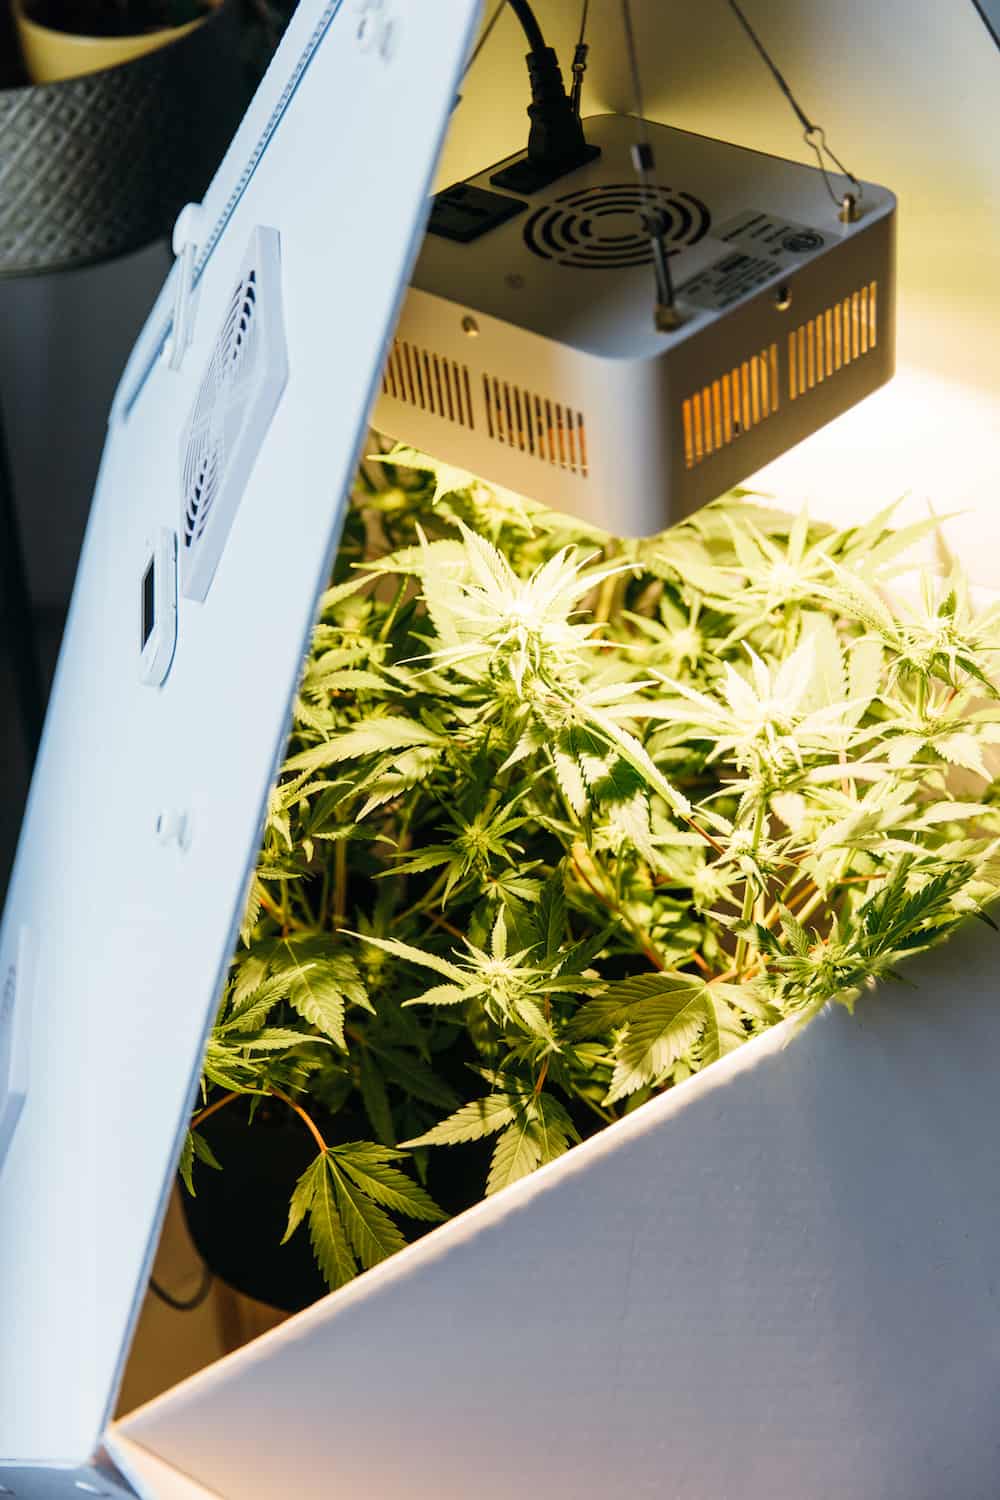 Why Leaflit Wants to Change the Way We View Growing Cannabis at Home